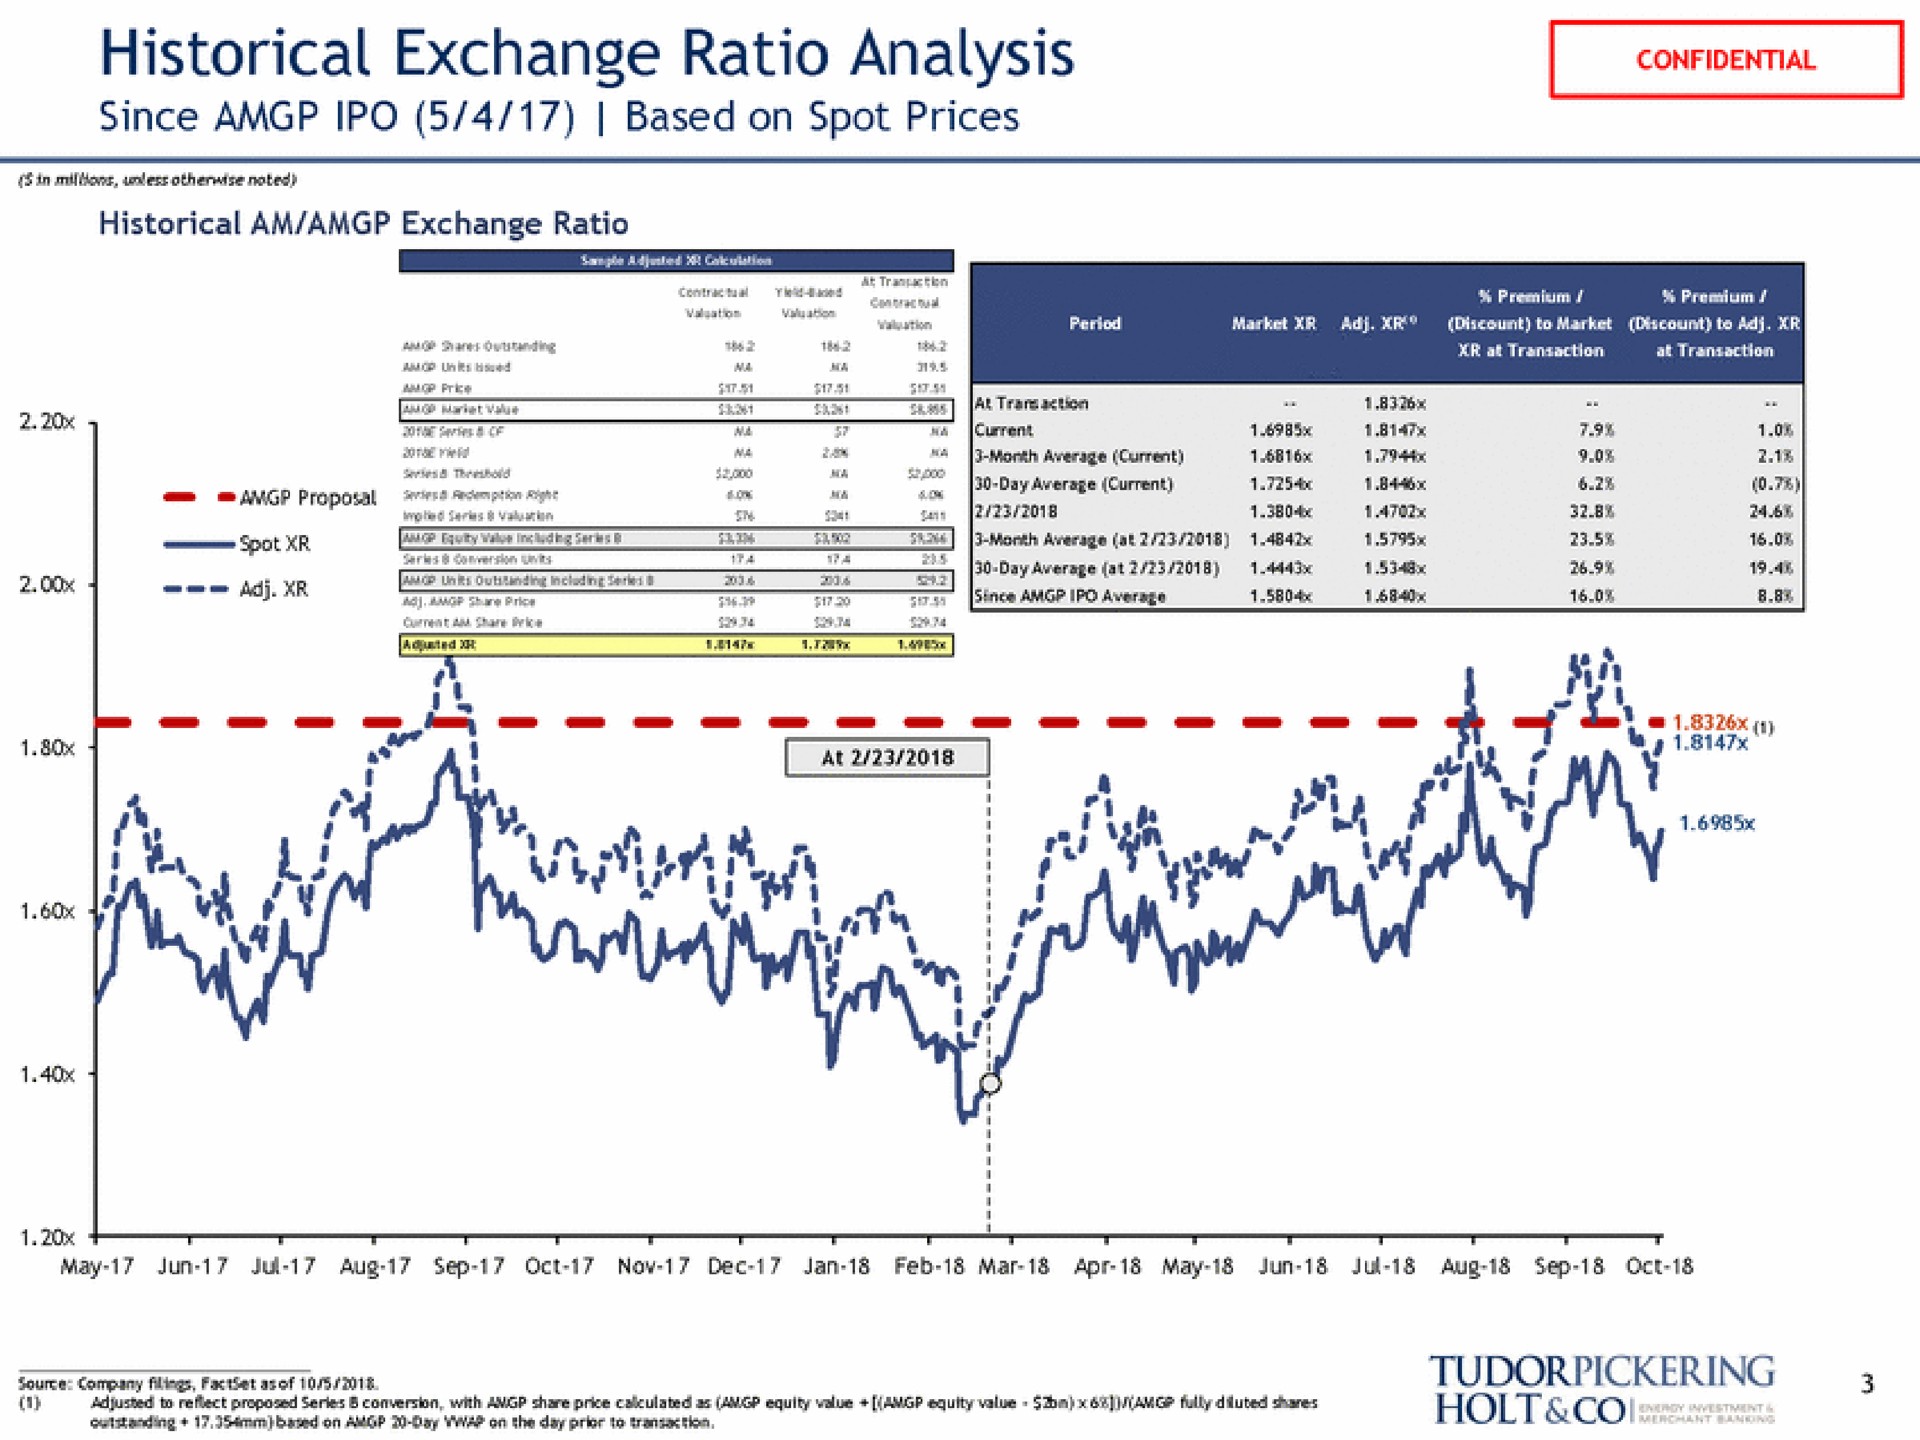 historical exchange ratio analysis since based on spot prices a oat a a my | Tudor, Pickering, Holt & Co